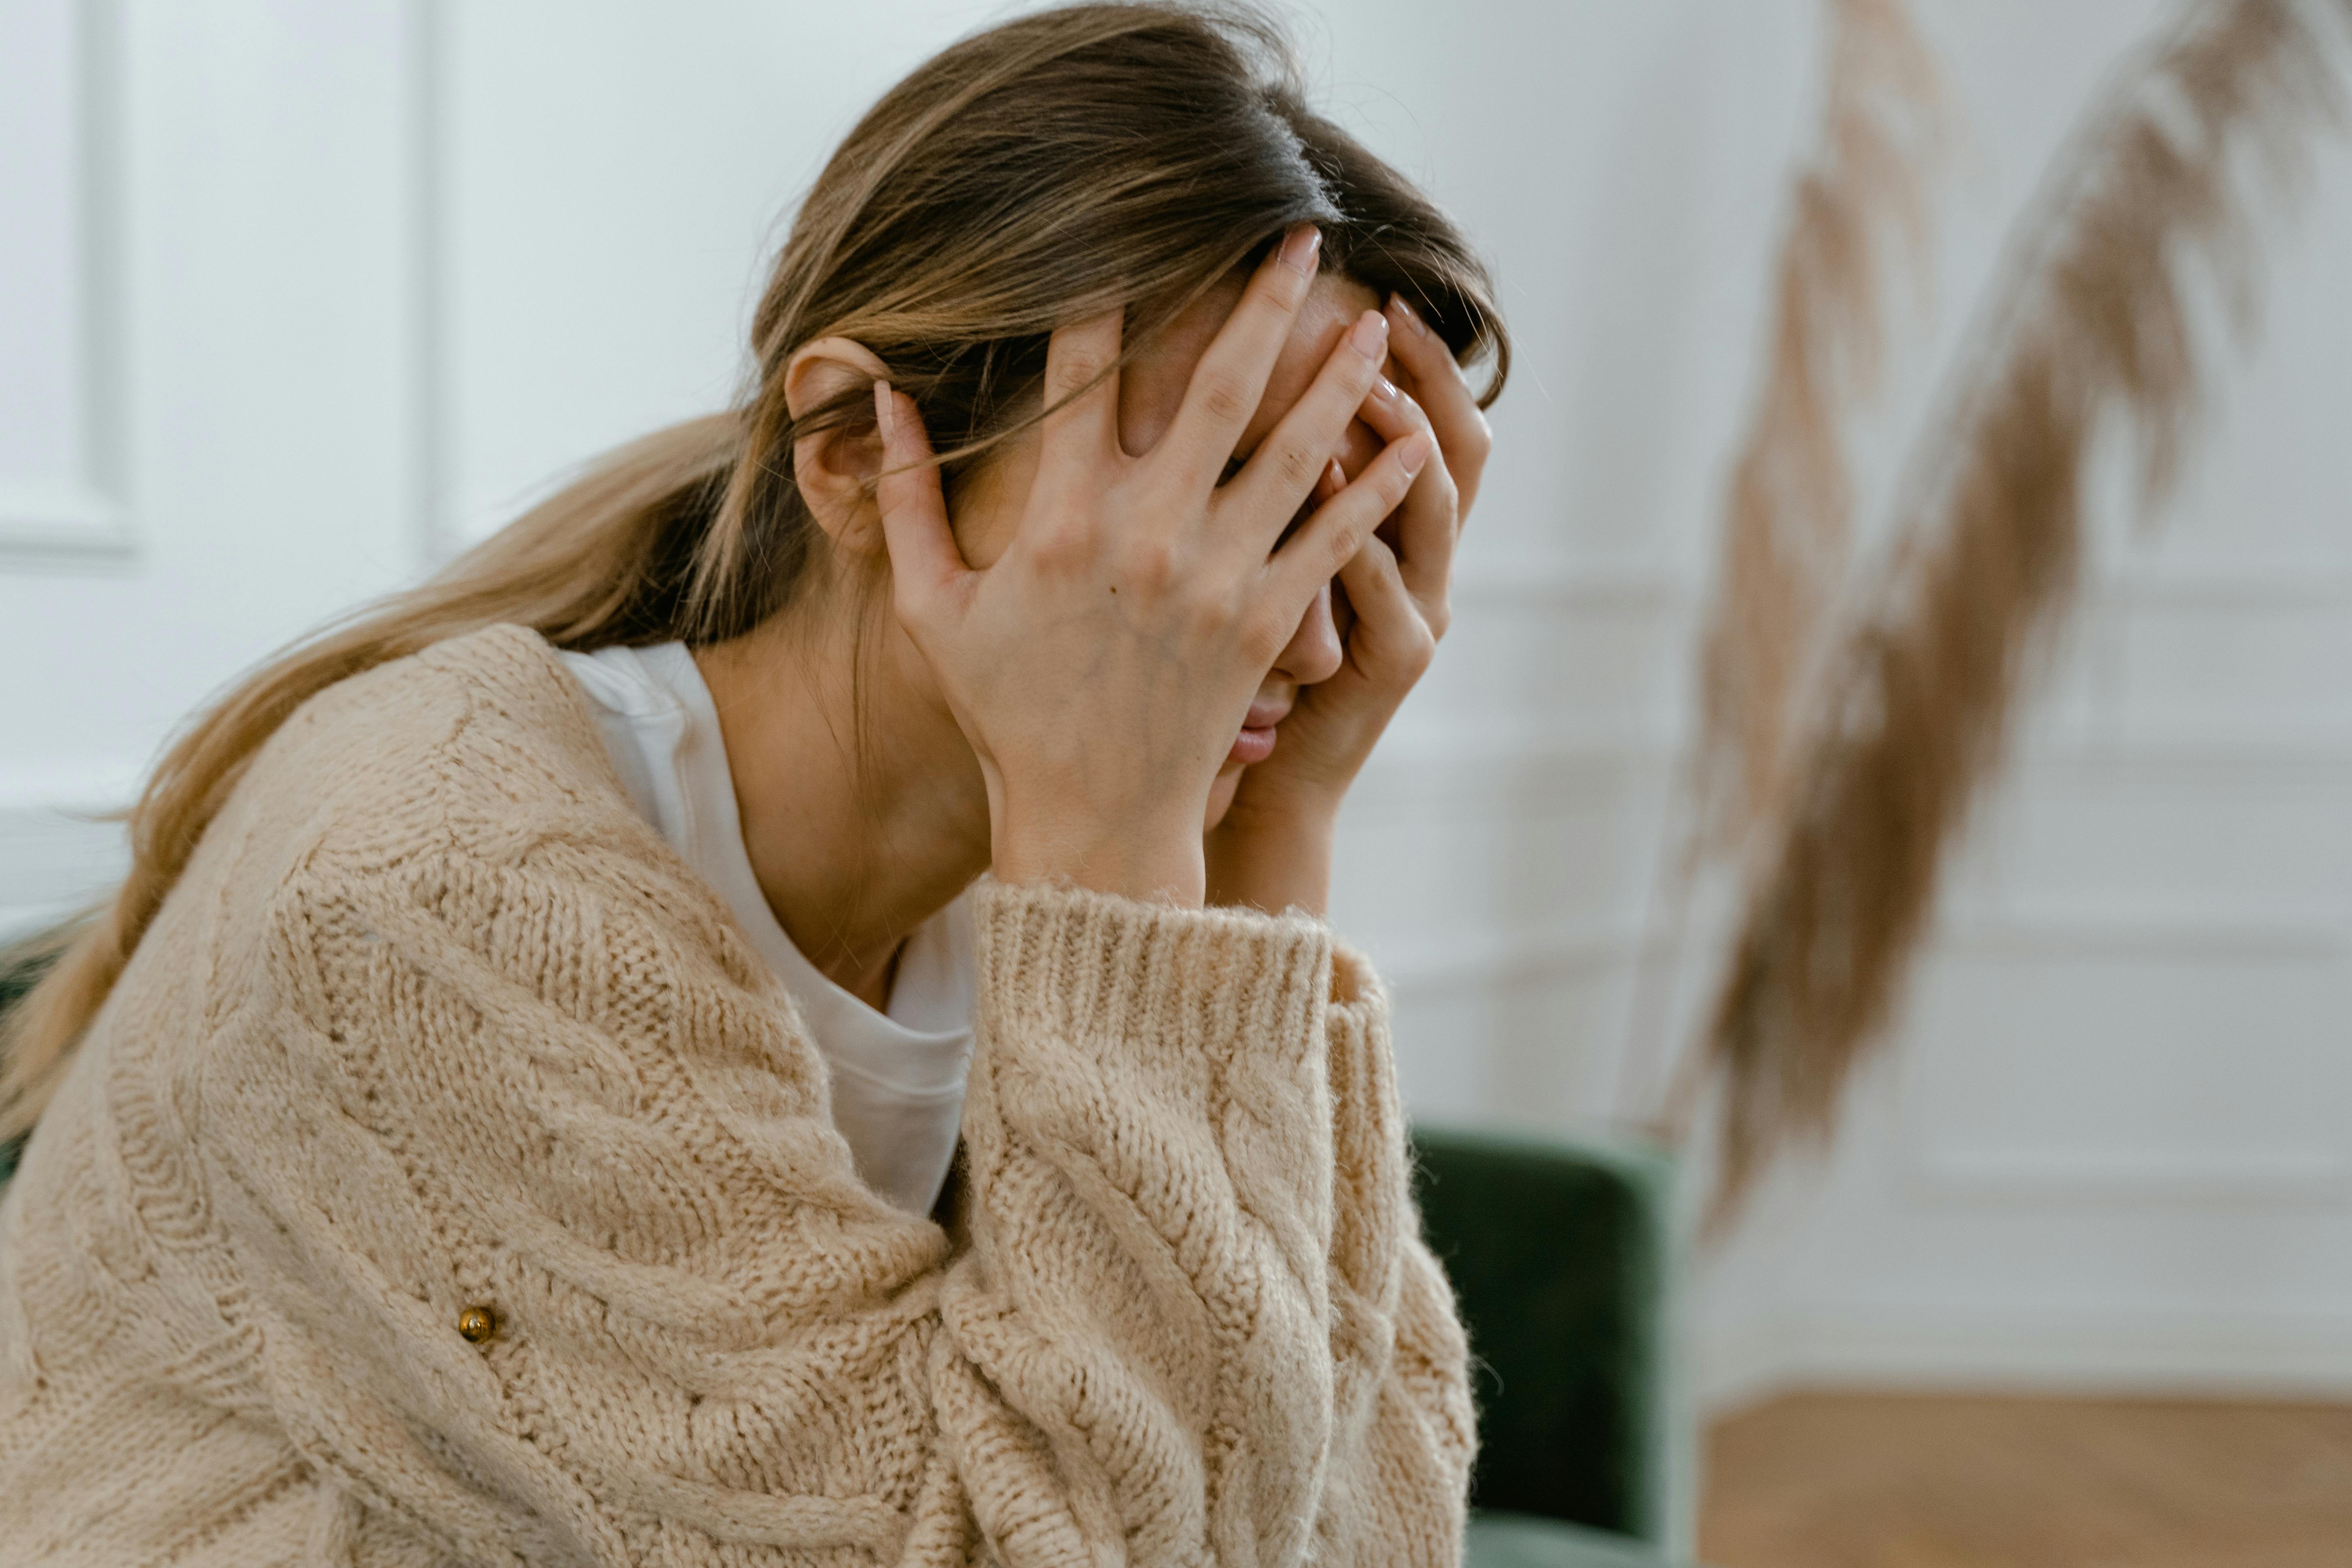 A distressed and upset woman covering her face with her hands | Source: Pexels